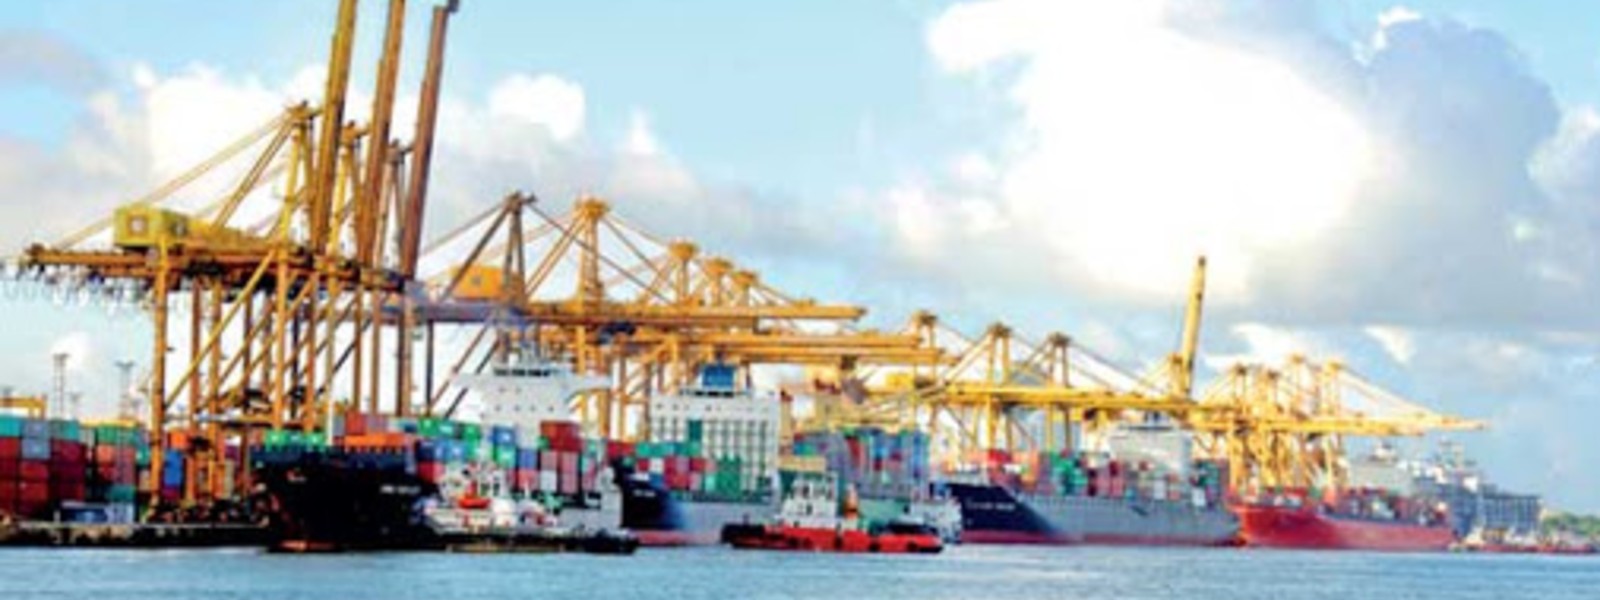 60 port workers exposed to COVID-19 to-date; Shipping Ops delayed